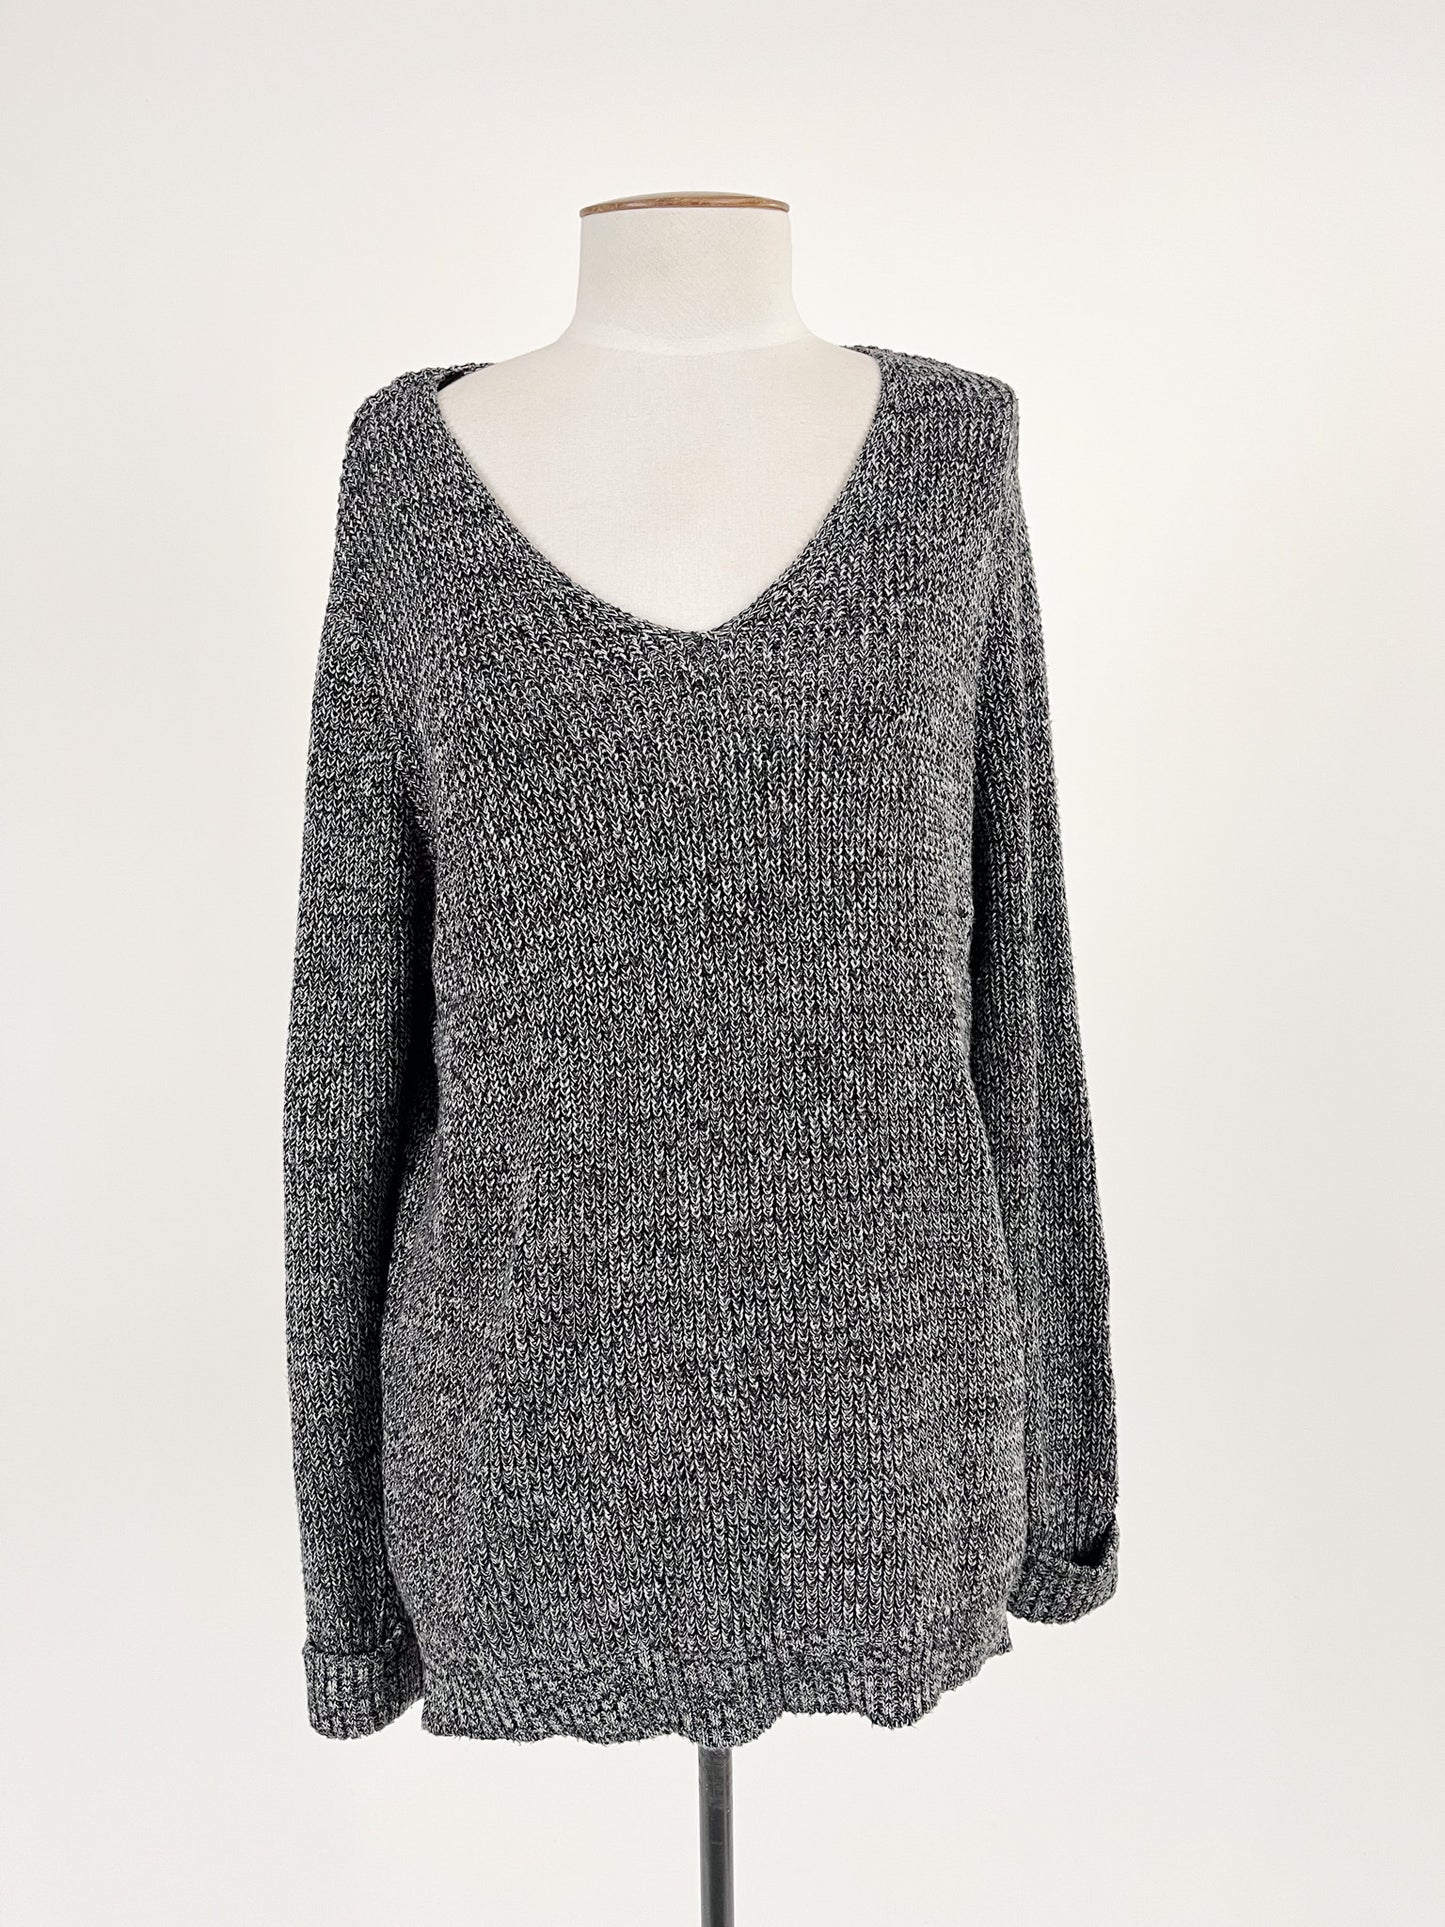 Glassons | Grey Casual Jumper | Size S